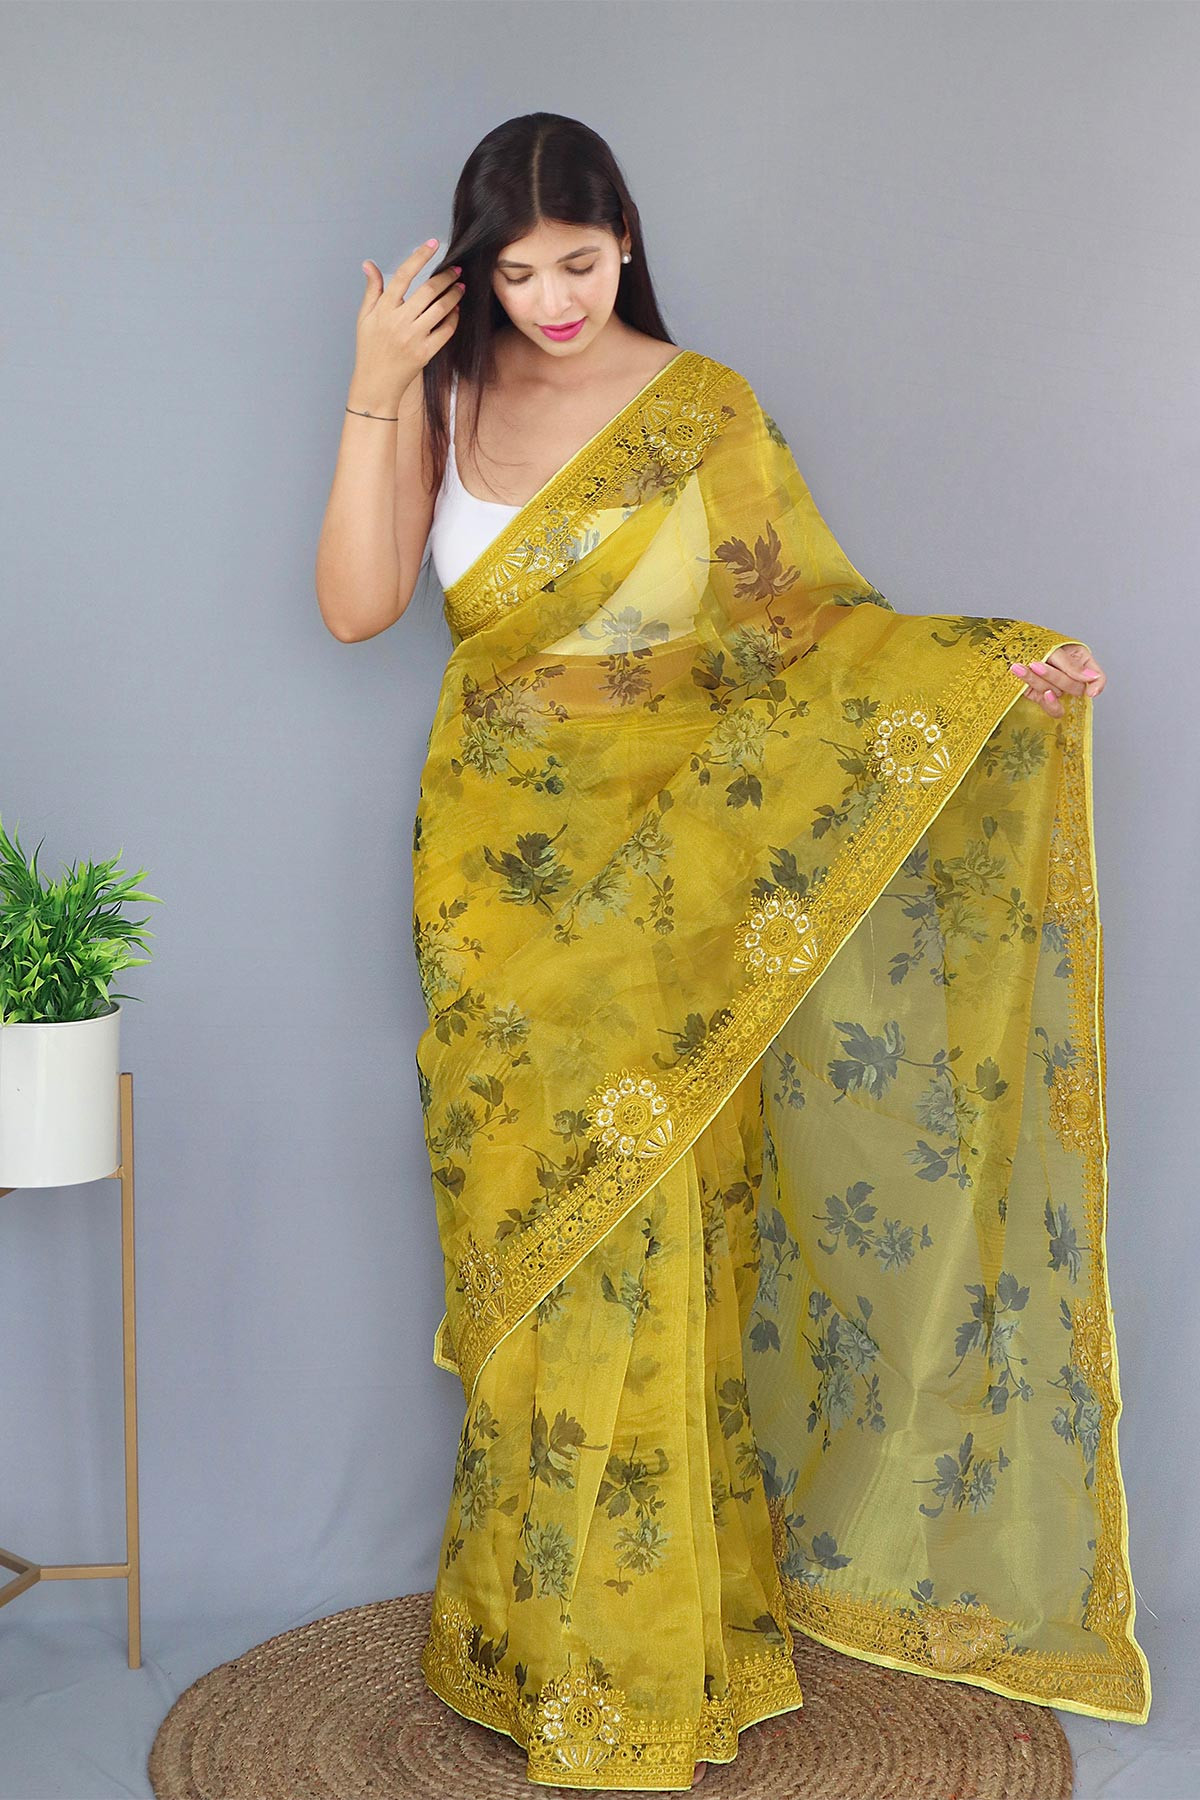 Pure Organza Silk Digital Printed saree with Embroidery Work - Yellow